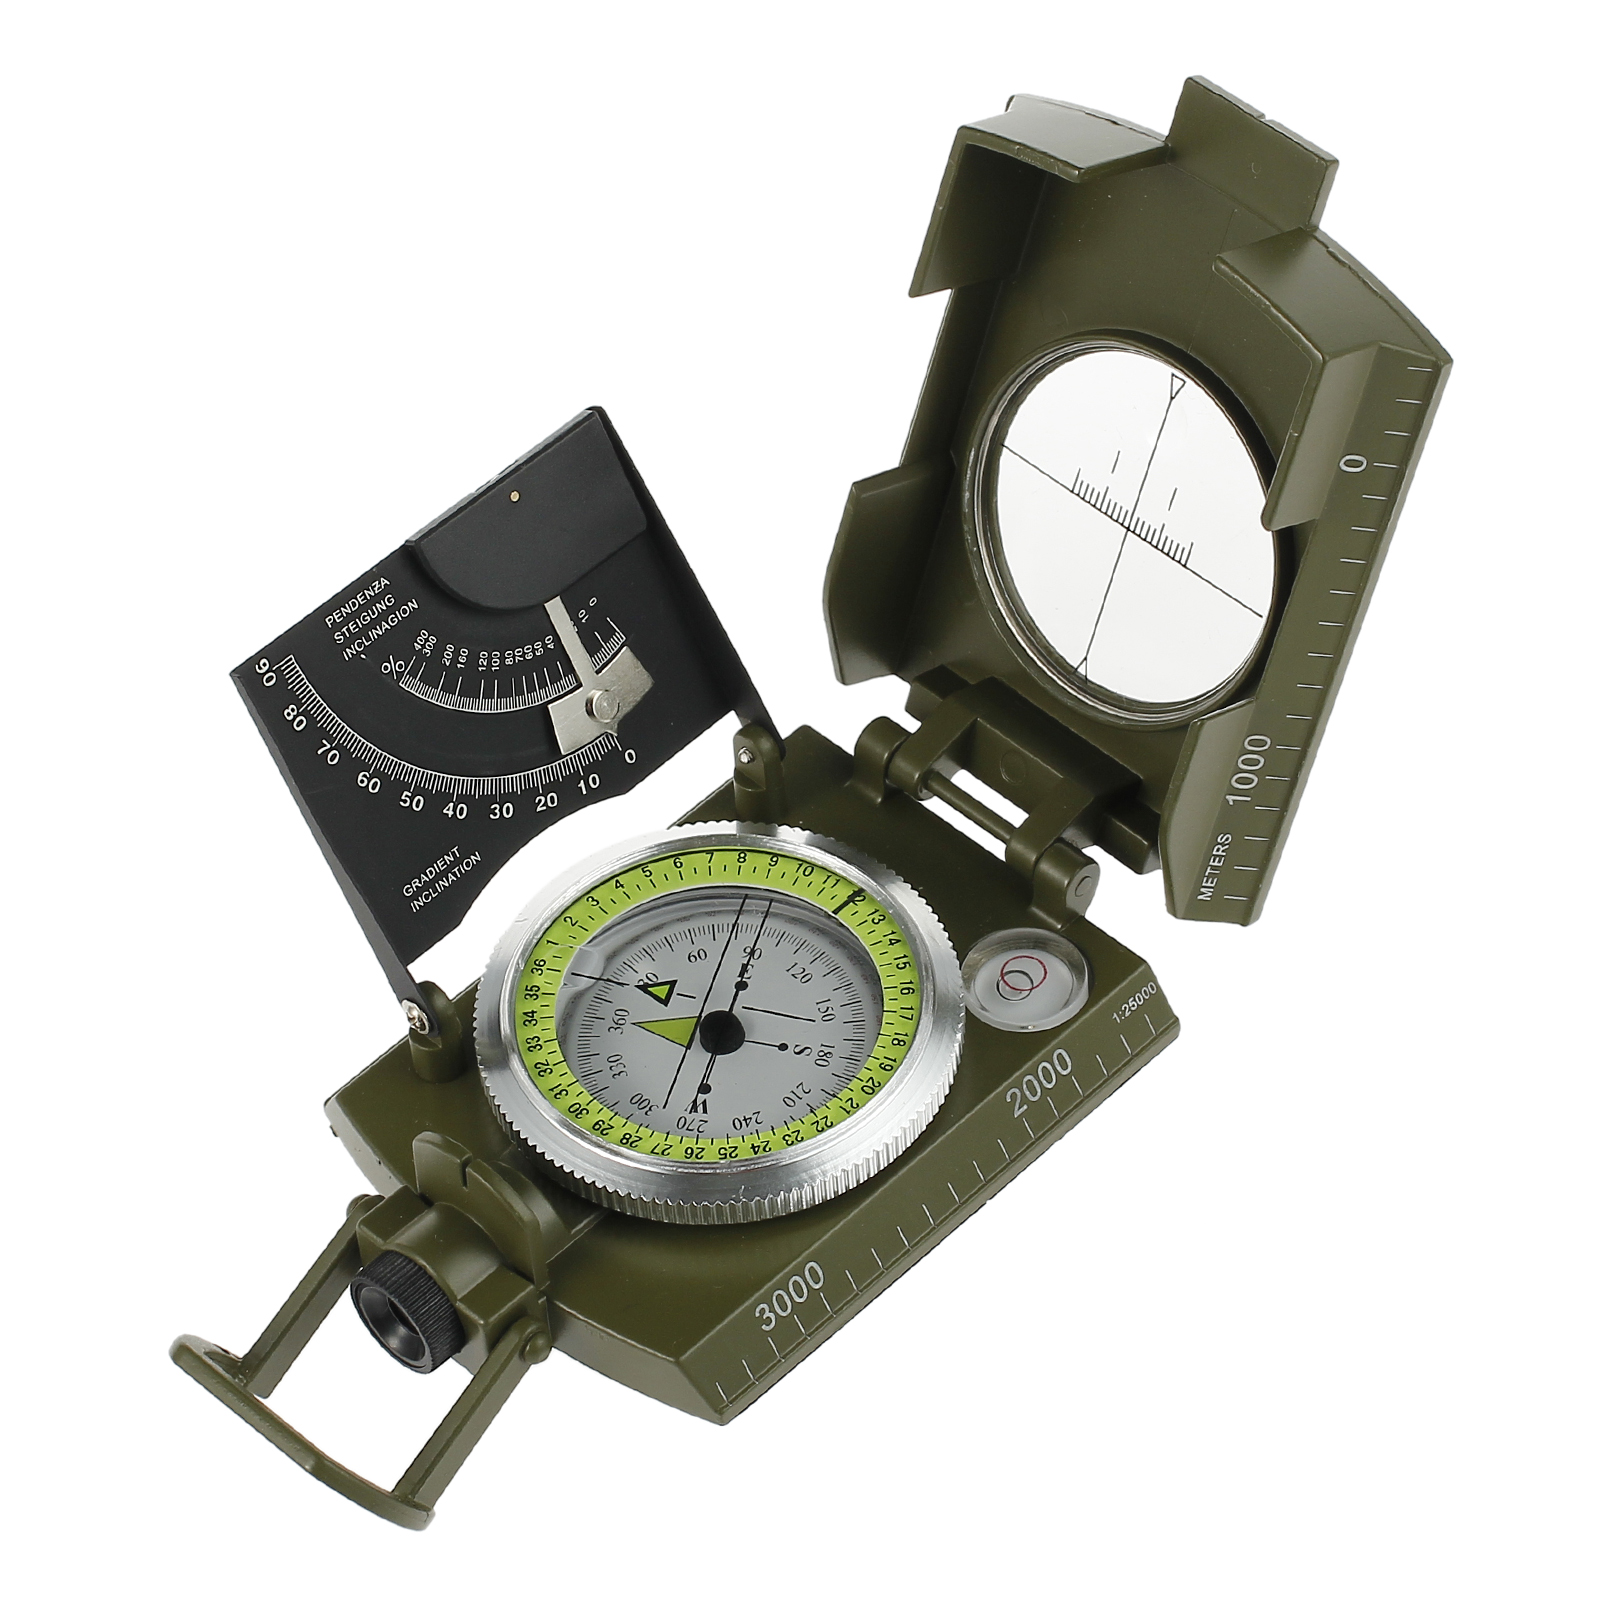 OEM Compass with Waterproof Multifunctional Metal Army Green Style for Camping, Hiking, Adventure, Positioning, Mapping - image 4 of 13